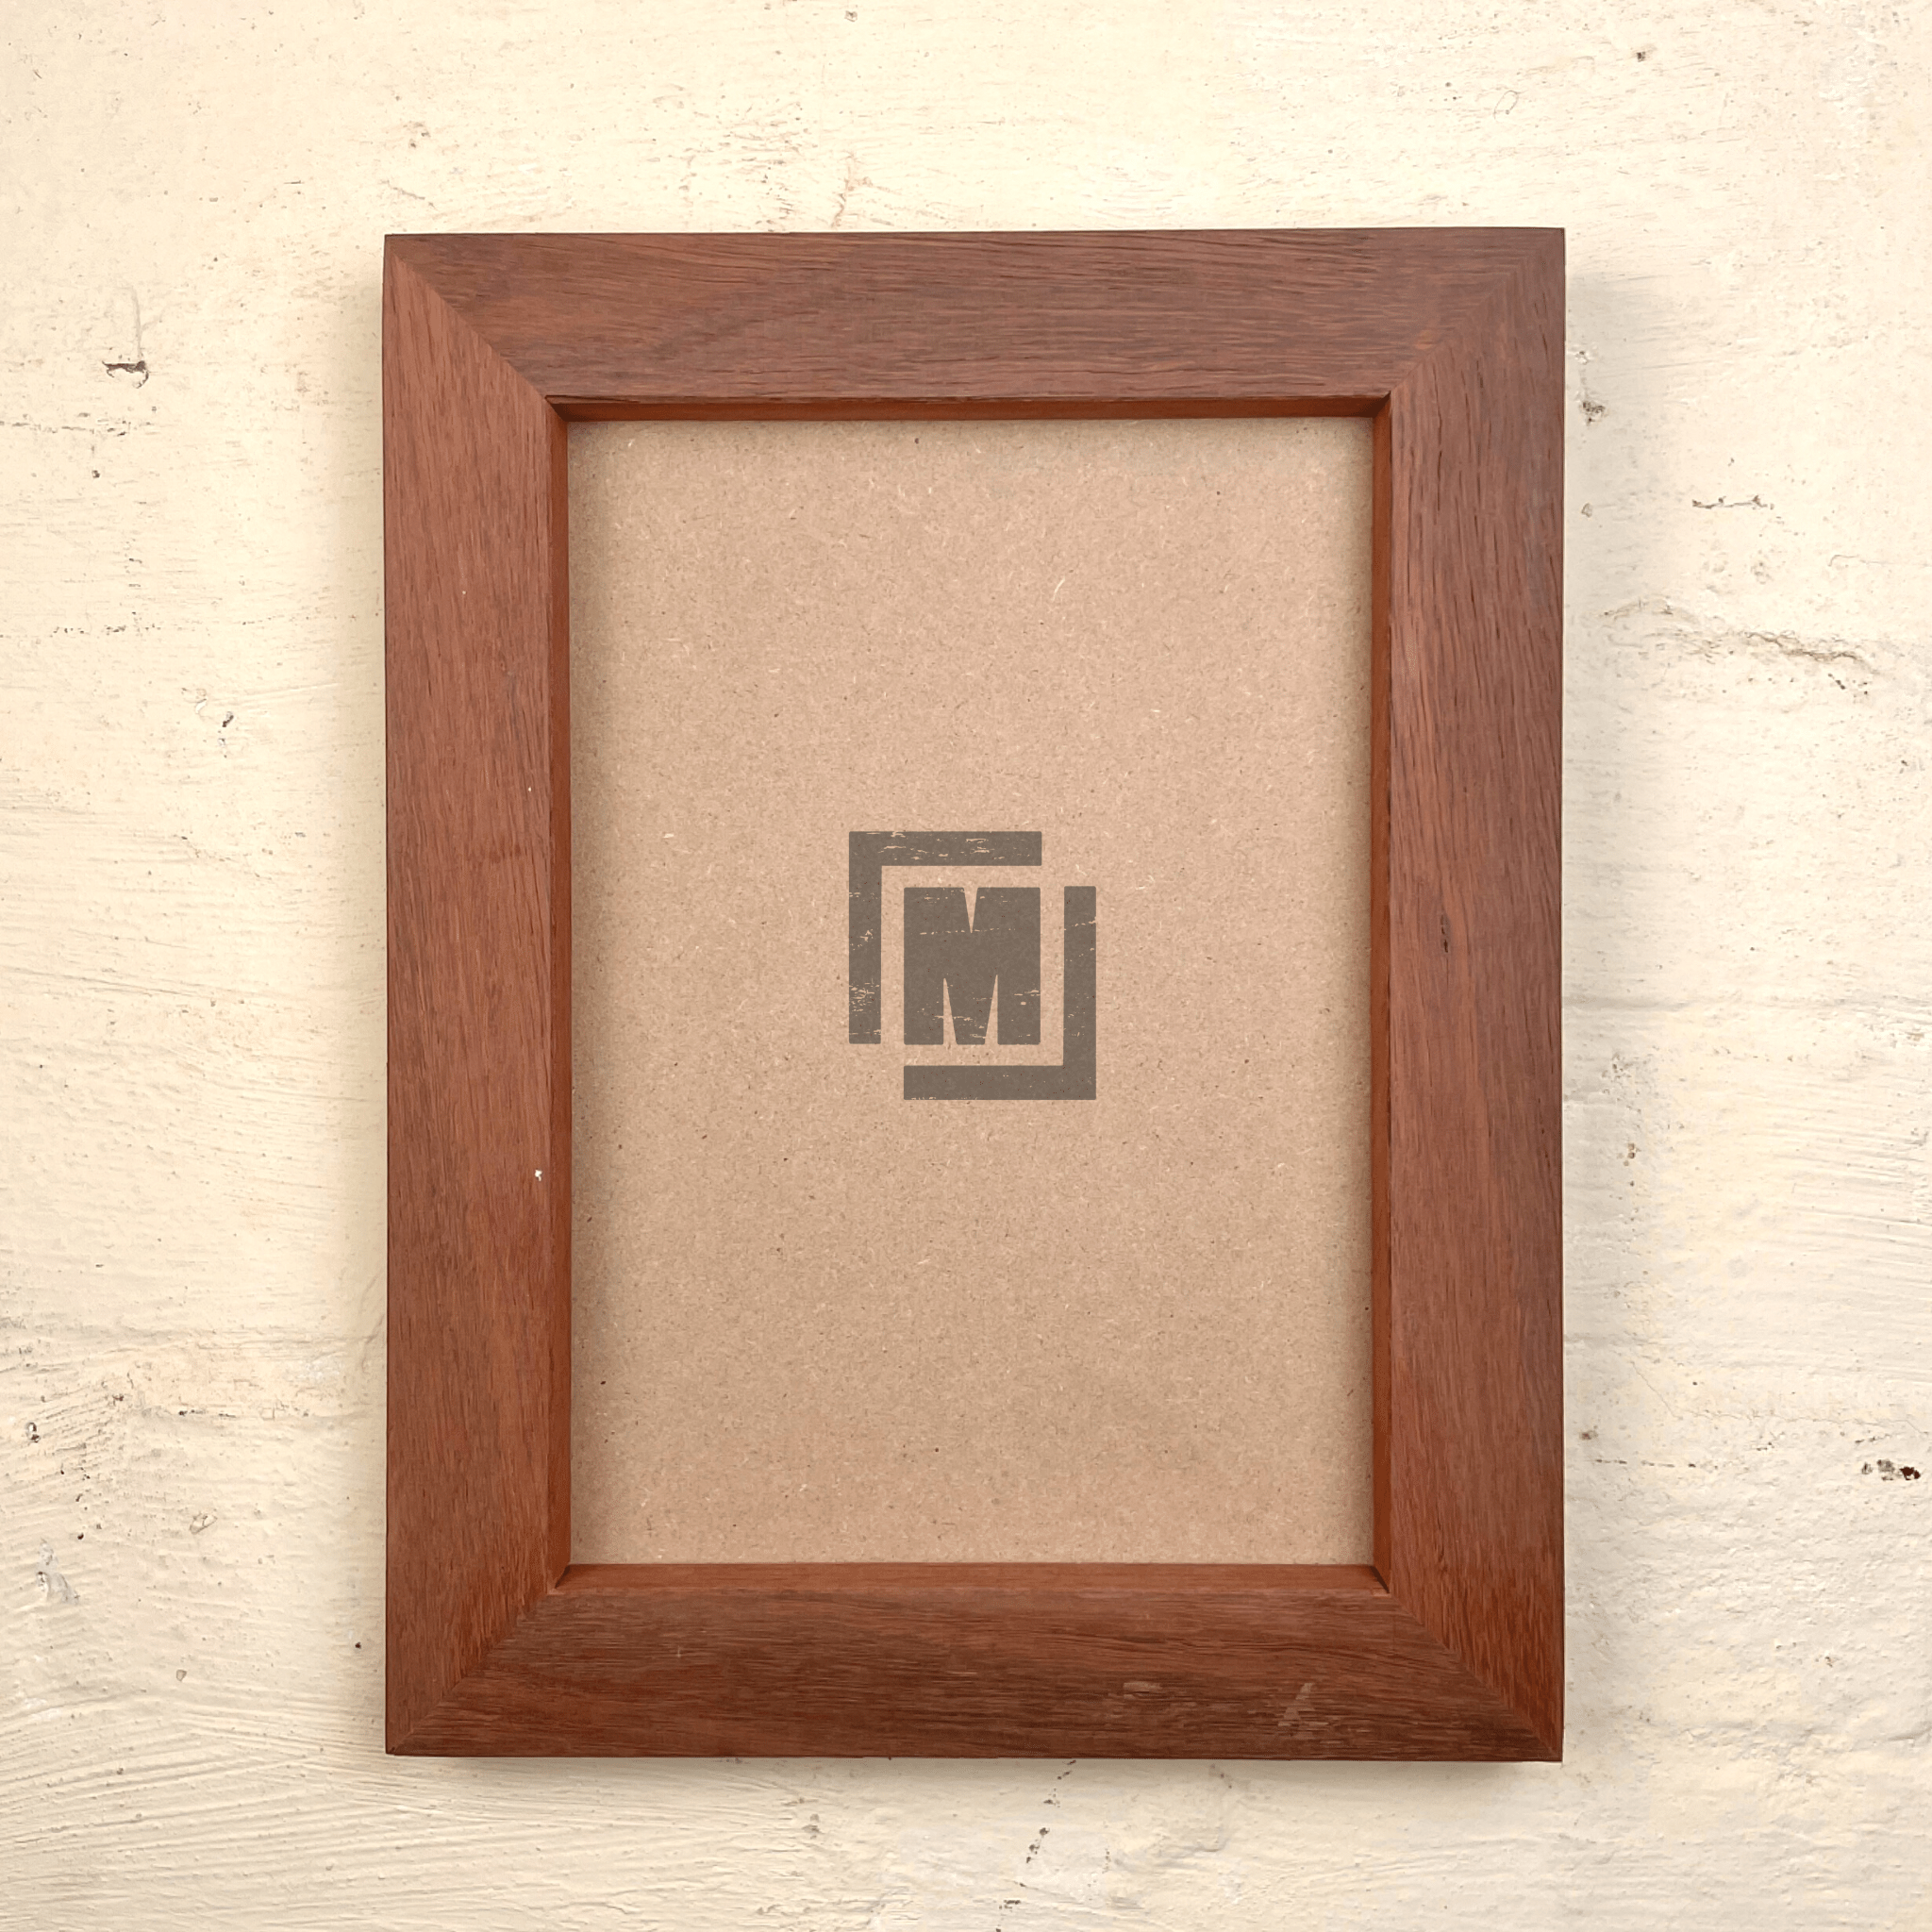 Recycled River Red Gum photo frames, A4 sizes, Australian Made.